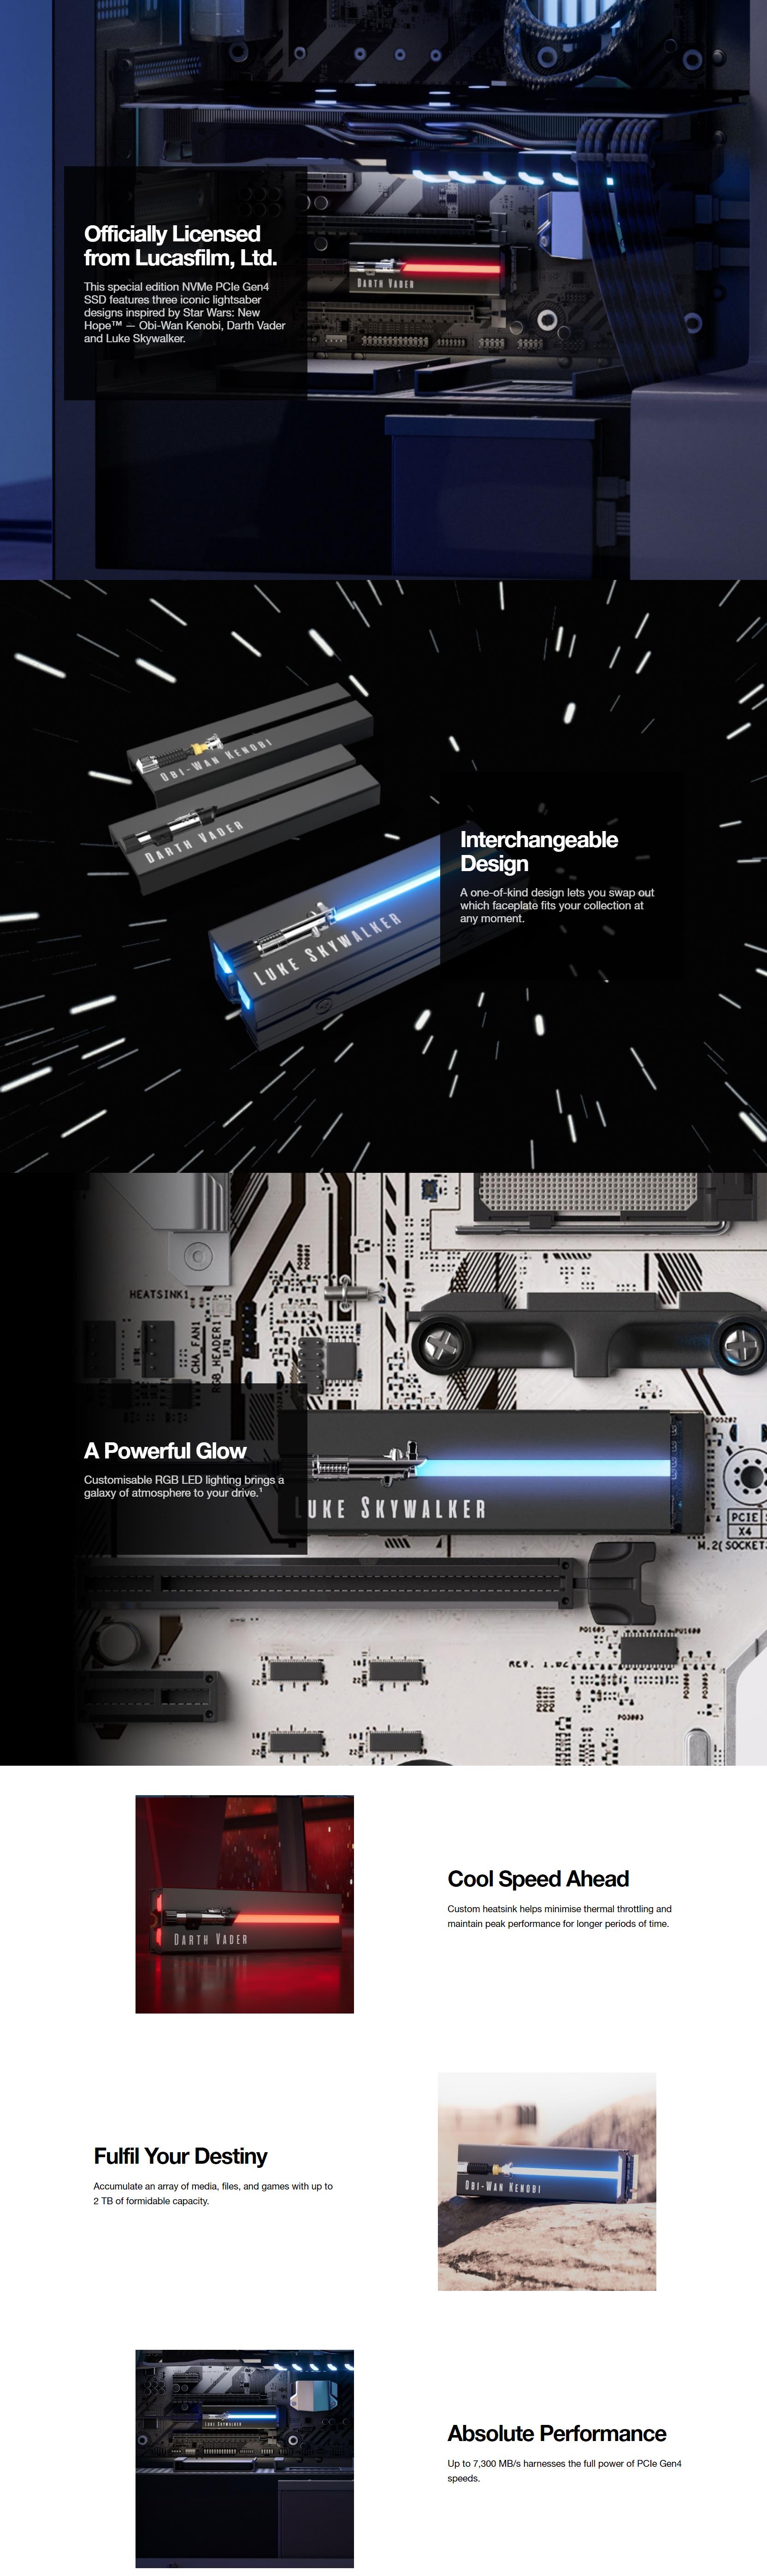 A large marketing image providing additional information about the product Seagate FireCuda w/ Heatsink PCIe Gen4 NVMe M.2 SSD - Star Wars Lightsaber Special Edition 1TB - Additional alt info not provided